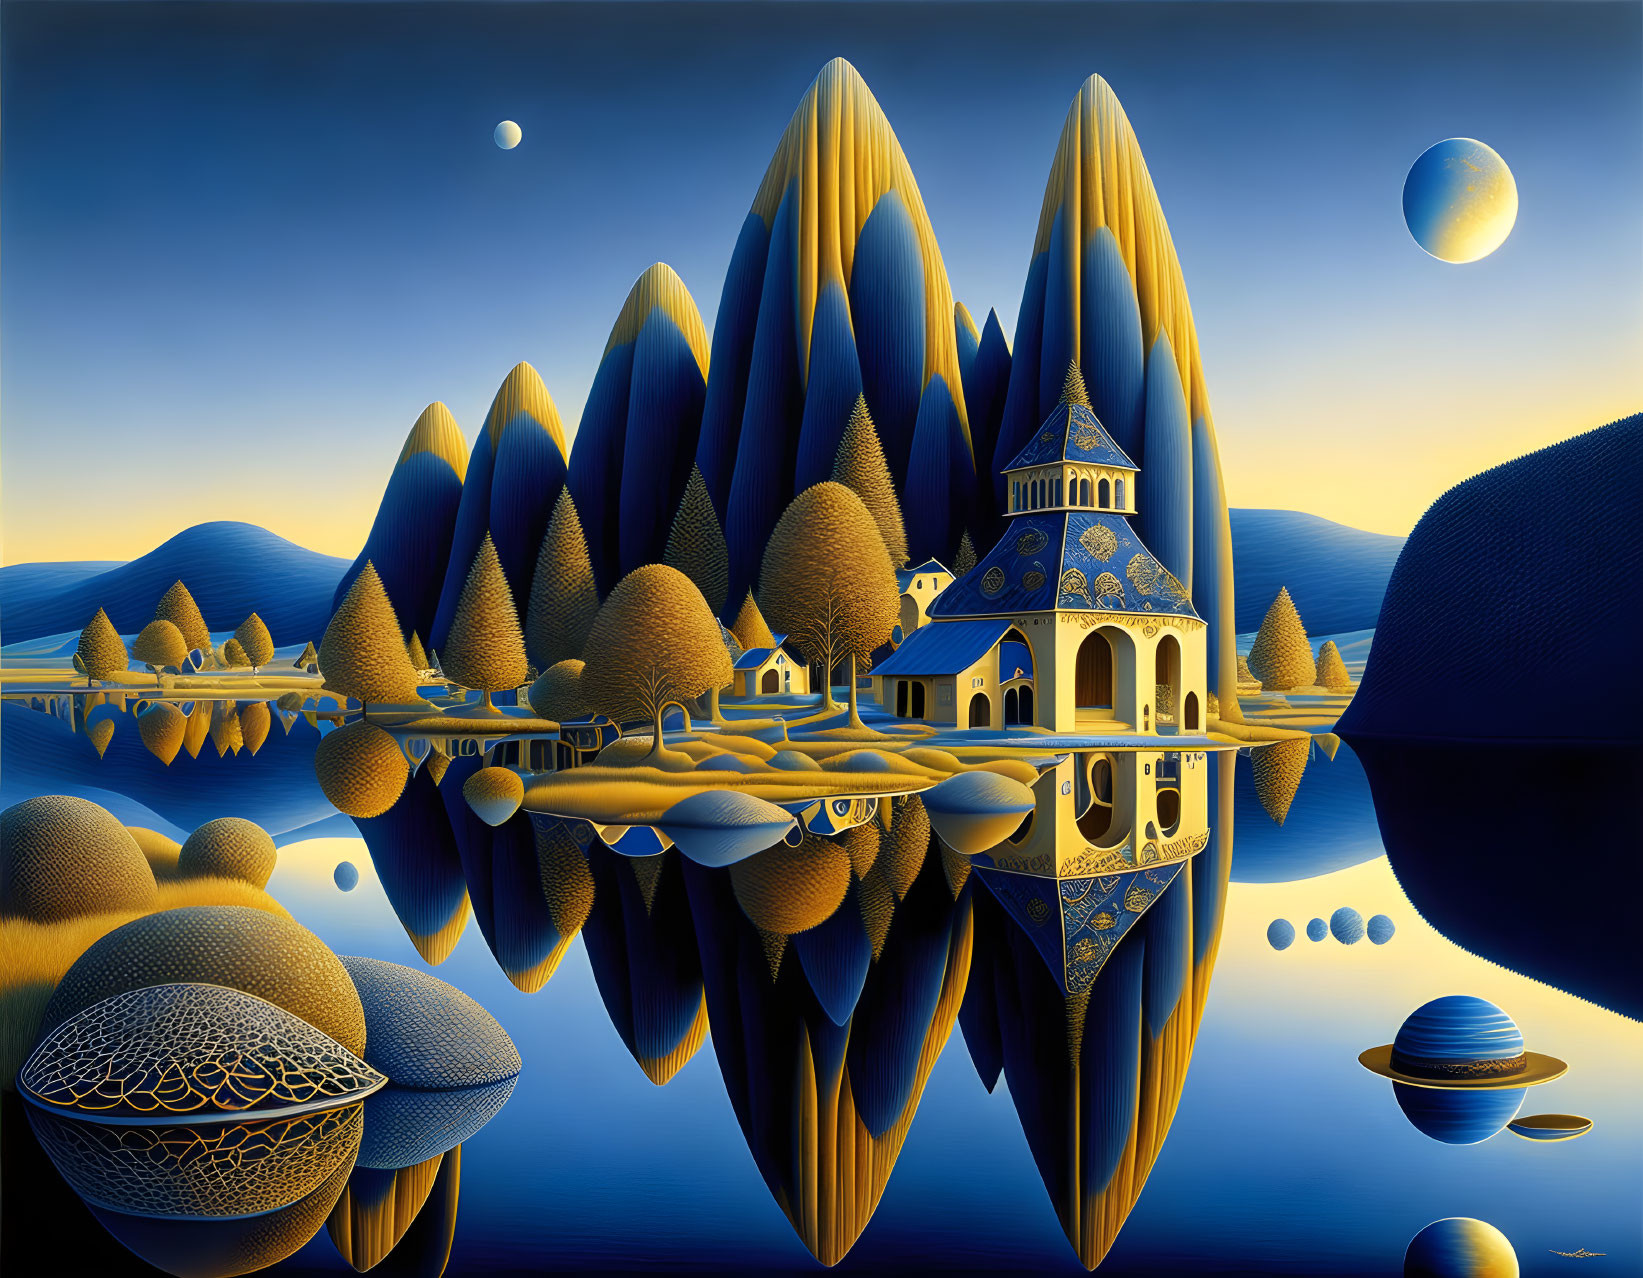 Surreal landscape with conical hills, reflective lake, mosaic house, and floating orbs